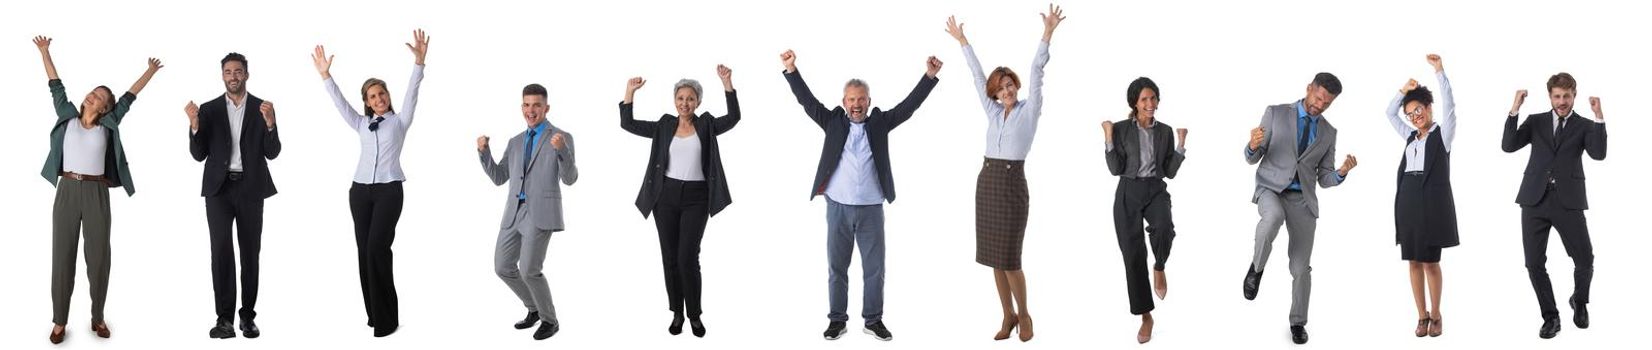 Set of full length portraits of happy multi-racial Group Of Business People Raising Arms Over White Background